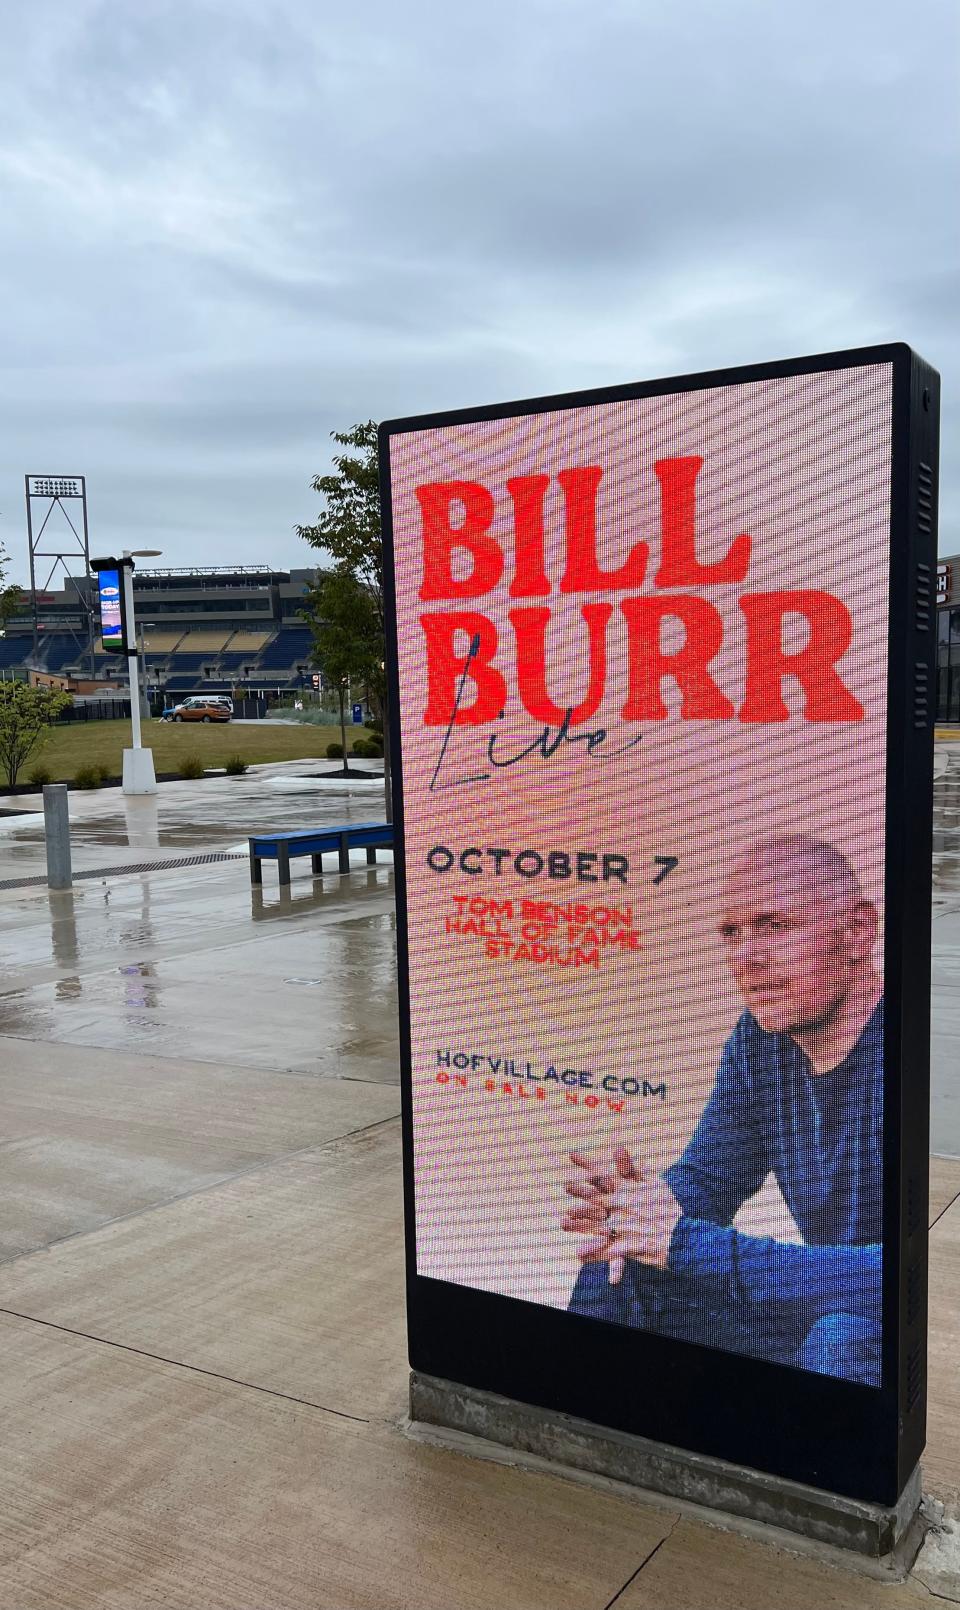 Star comedian and actor Bill Burr will perform on Oct. 7 at Tom Benson Hall of Fame Stadium at the Hall of Fame Village in Canton. Tickets cost $39 to $209.